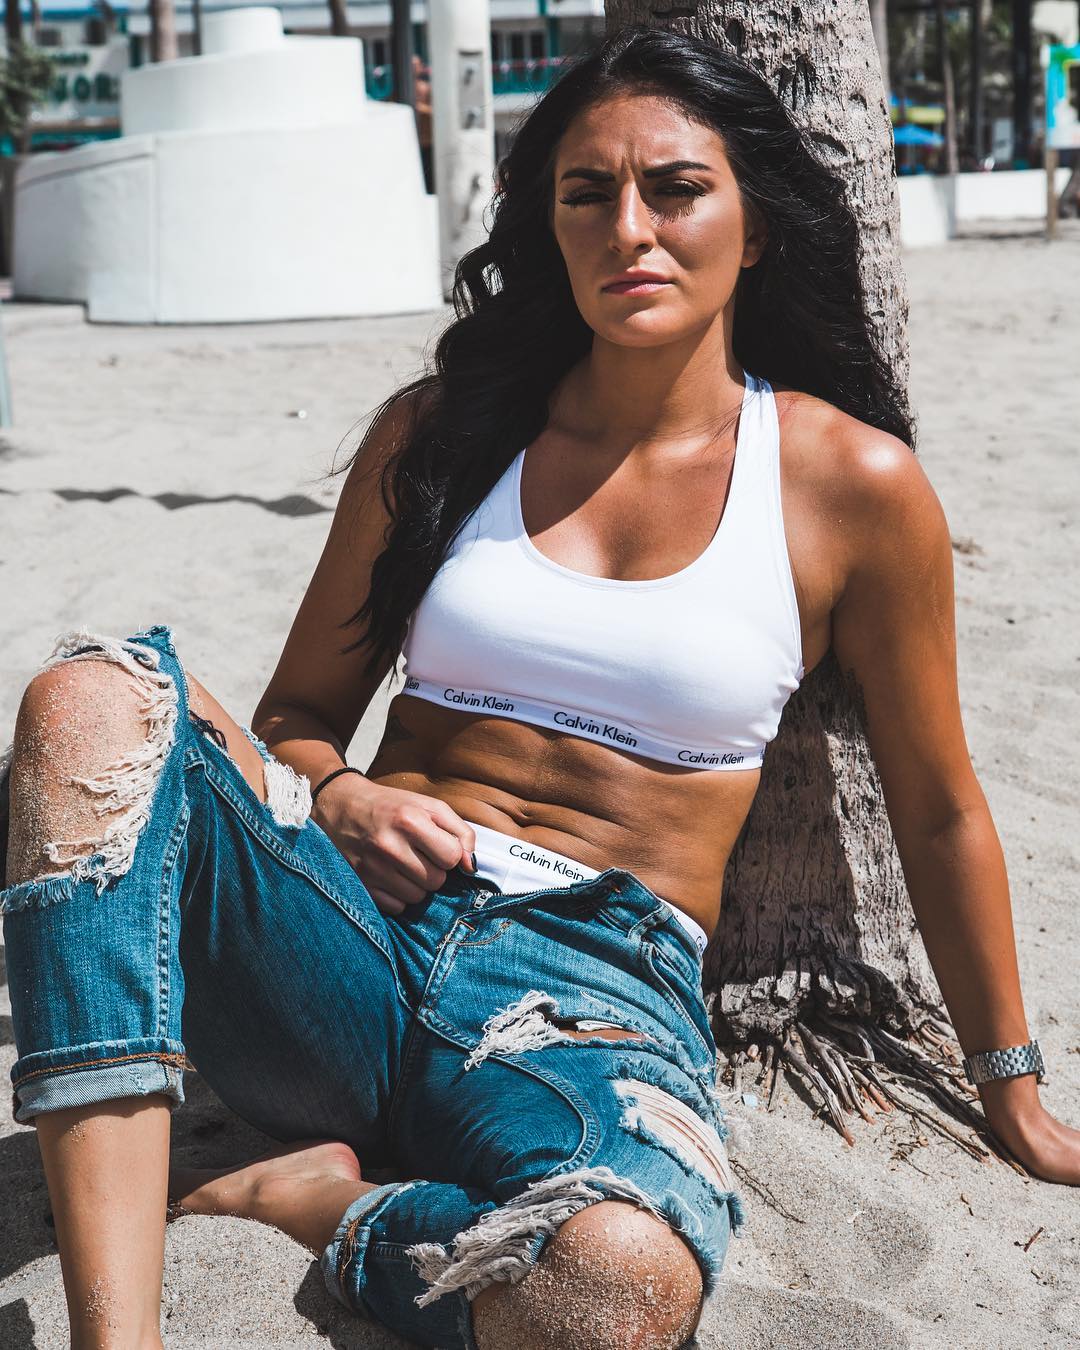 49 Hot Pictures Of Sonya DeVille from WWE Will Leave You Gasping.